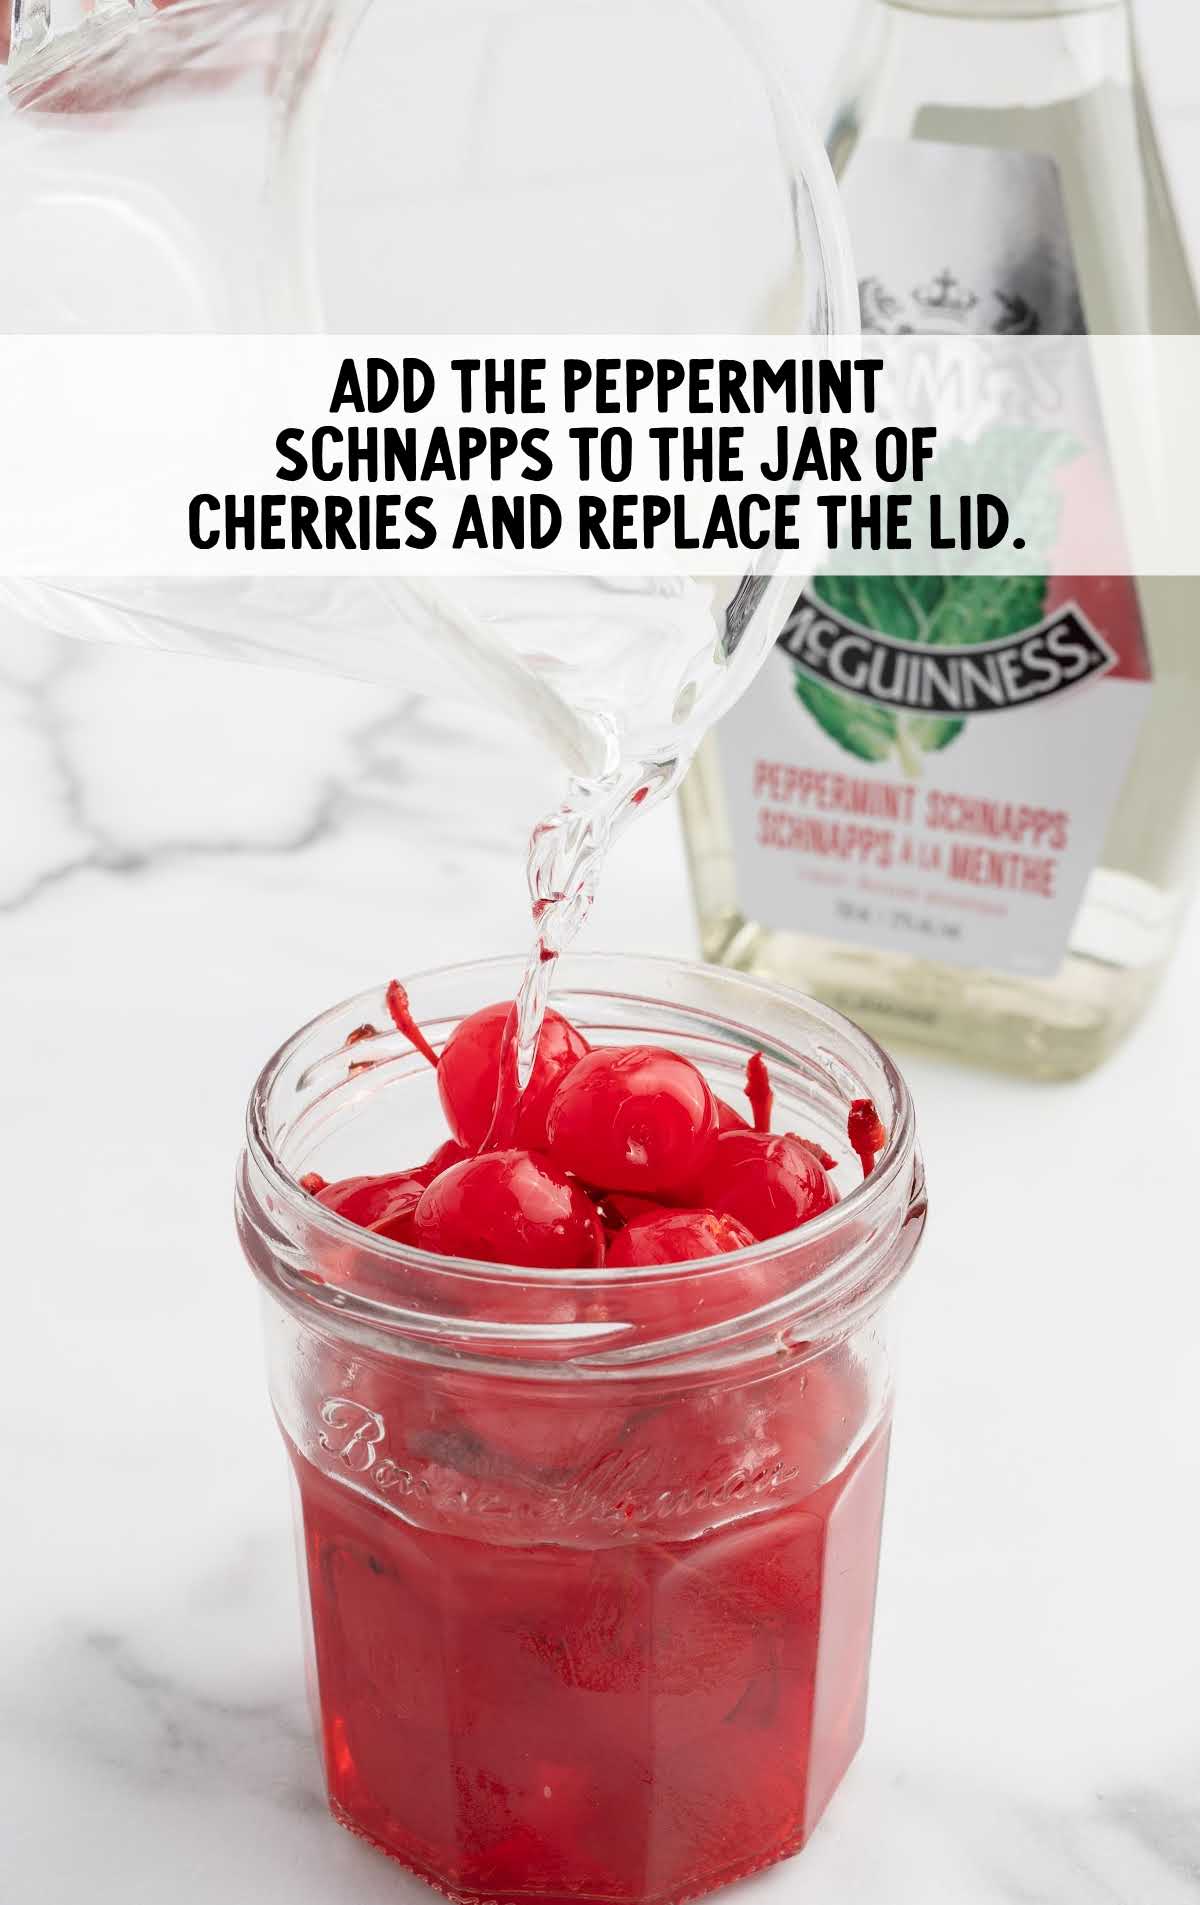 peppermint schnapps added to the jar of cherries